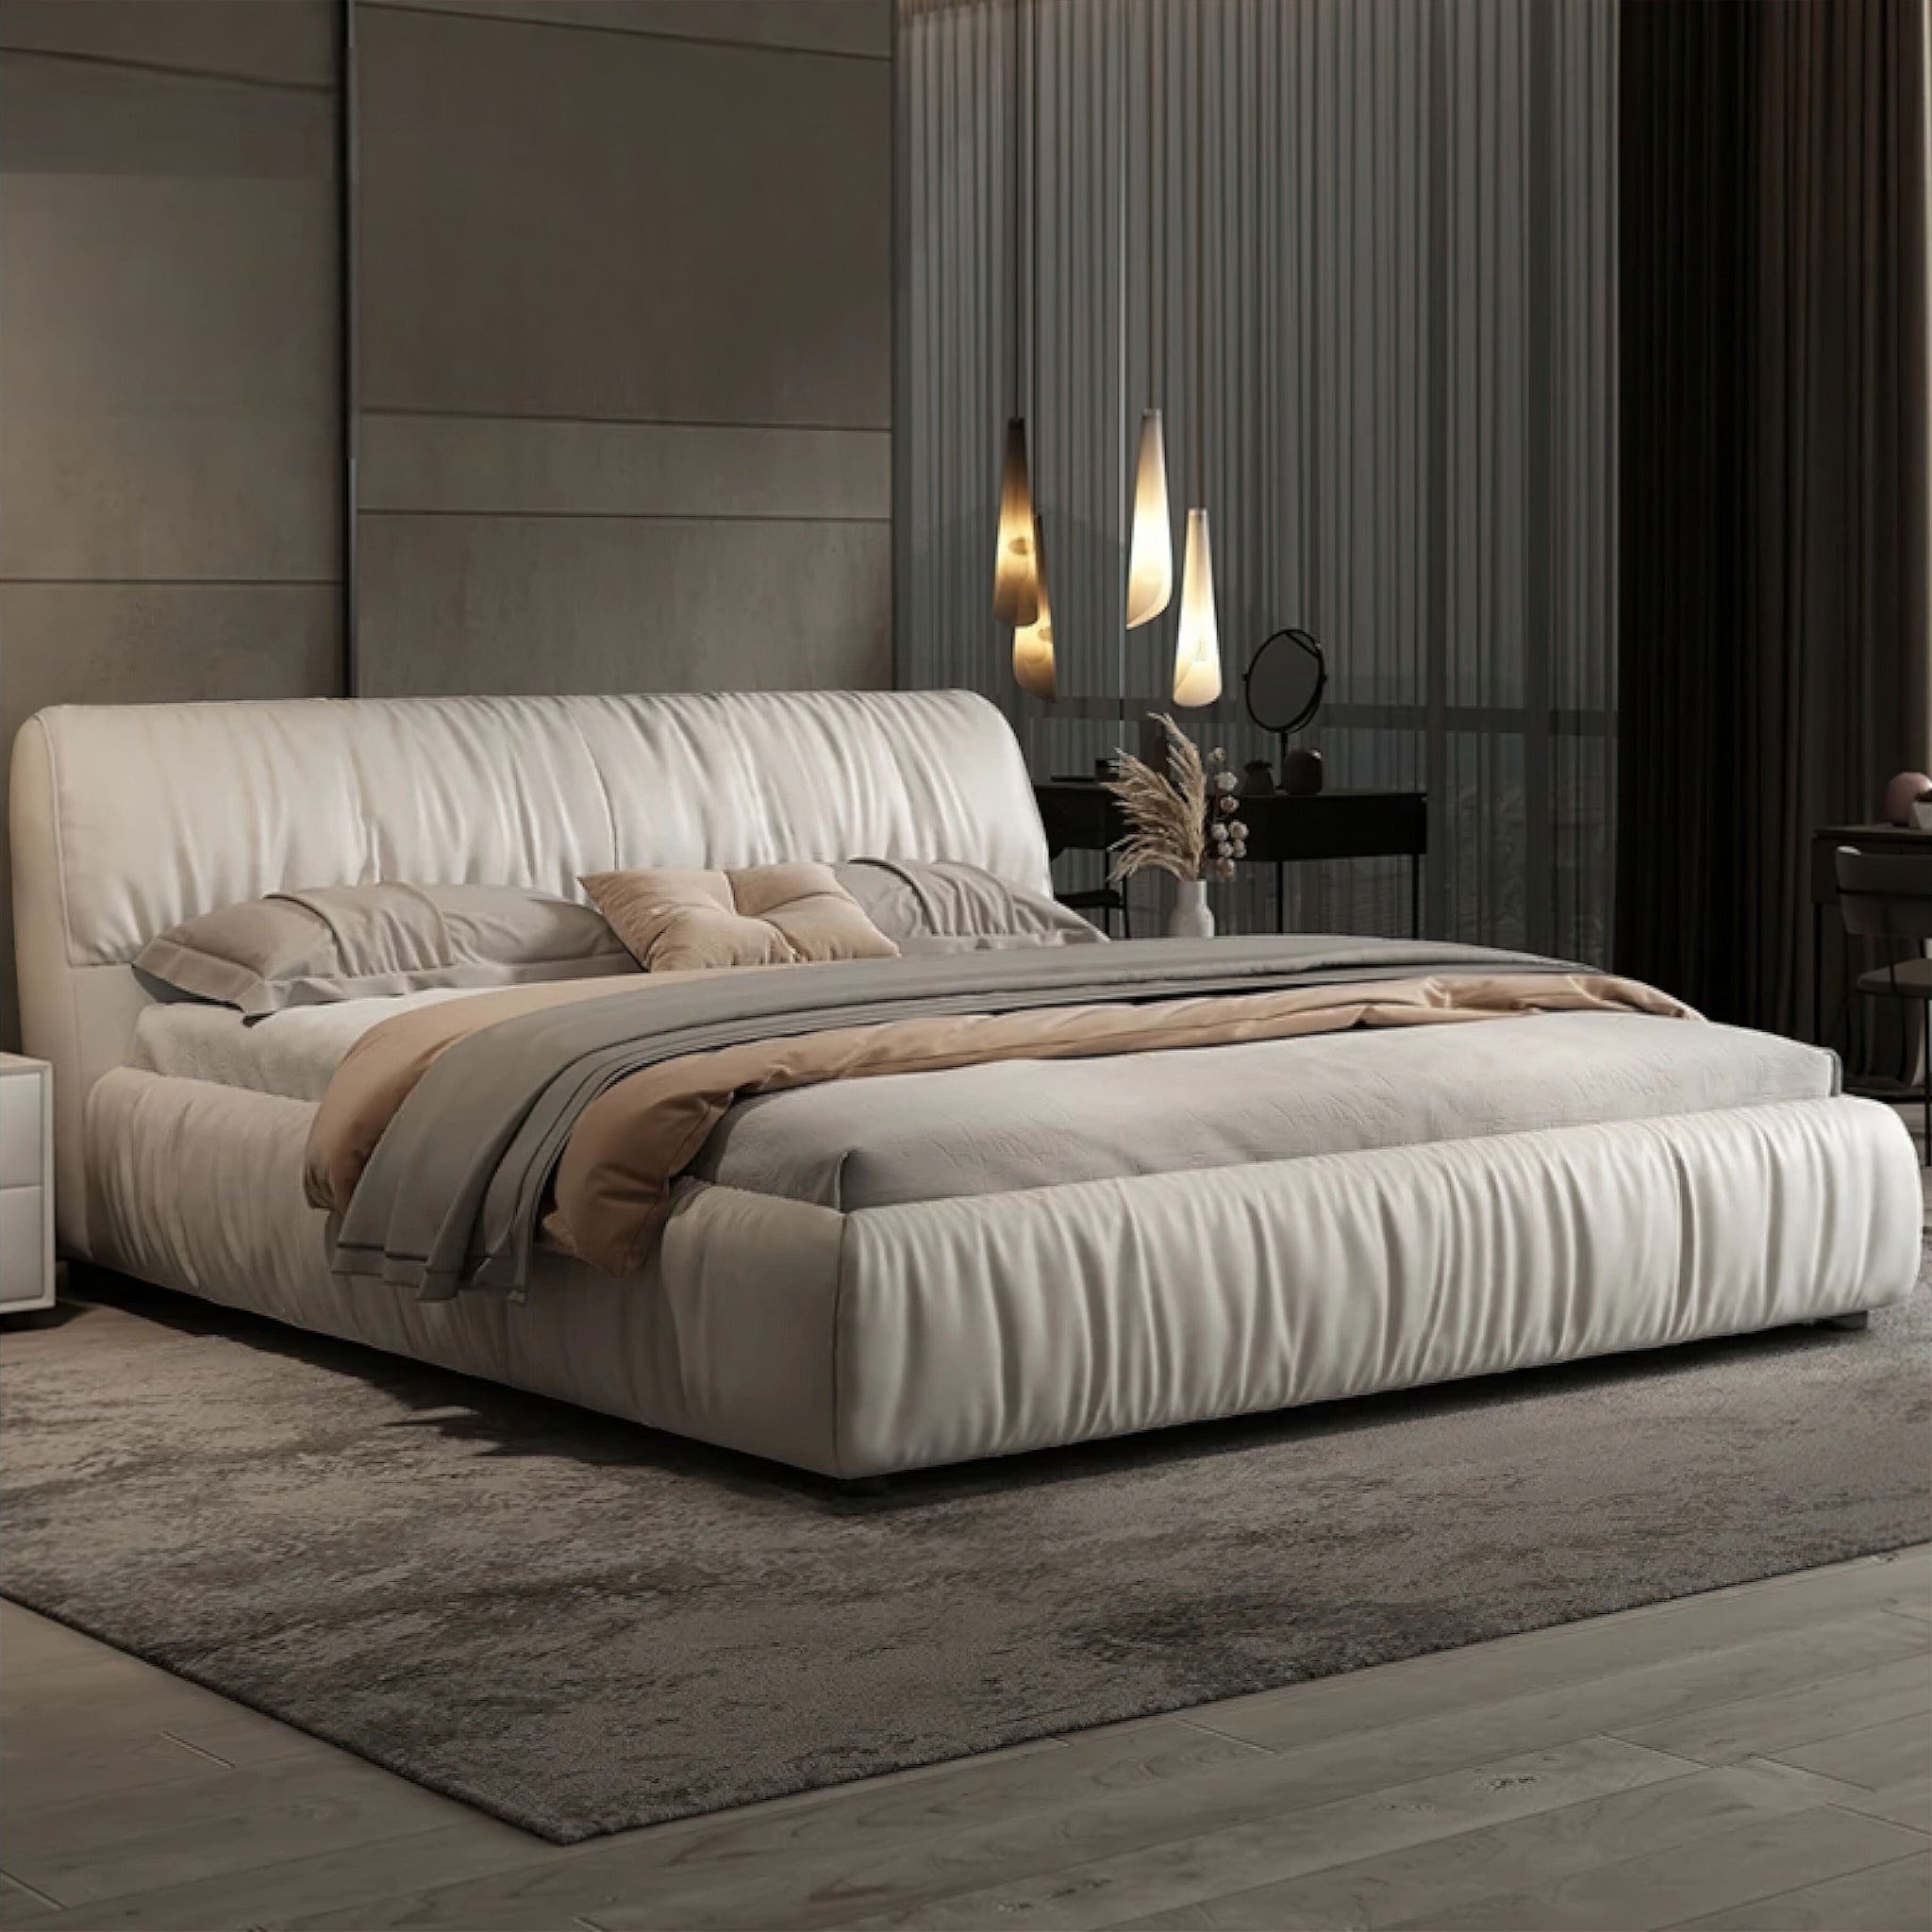 Arianna Bed Off White King 